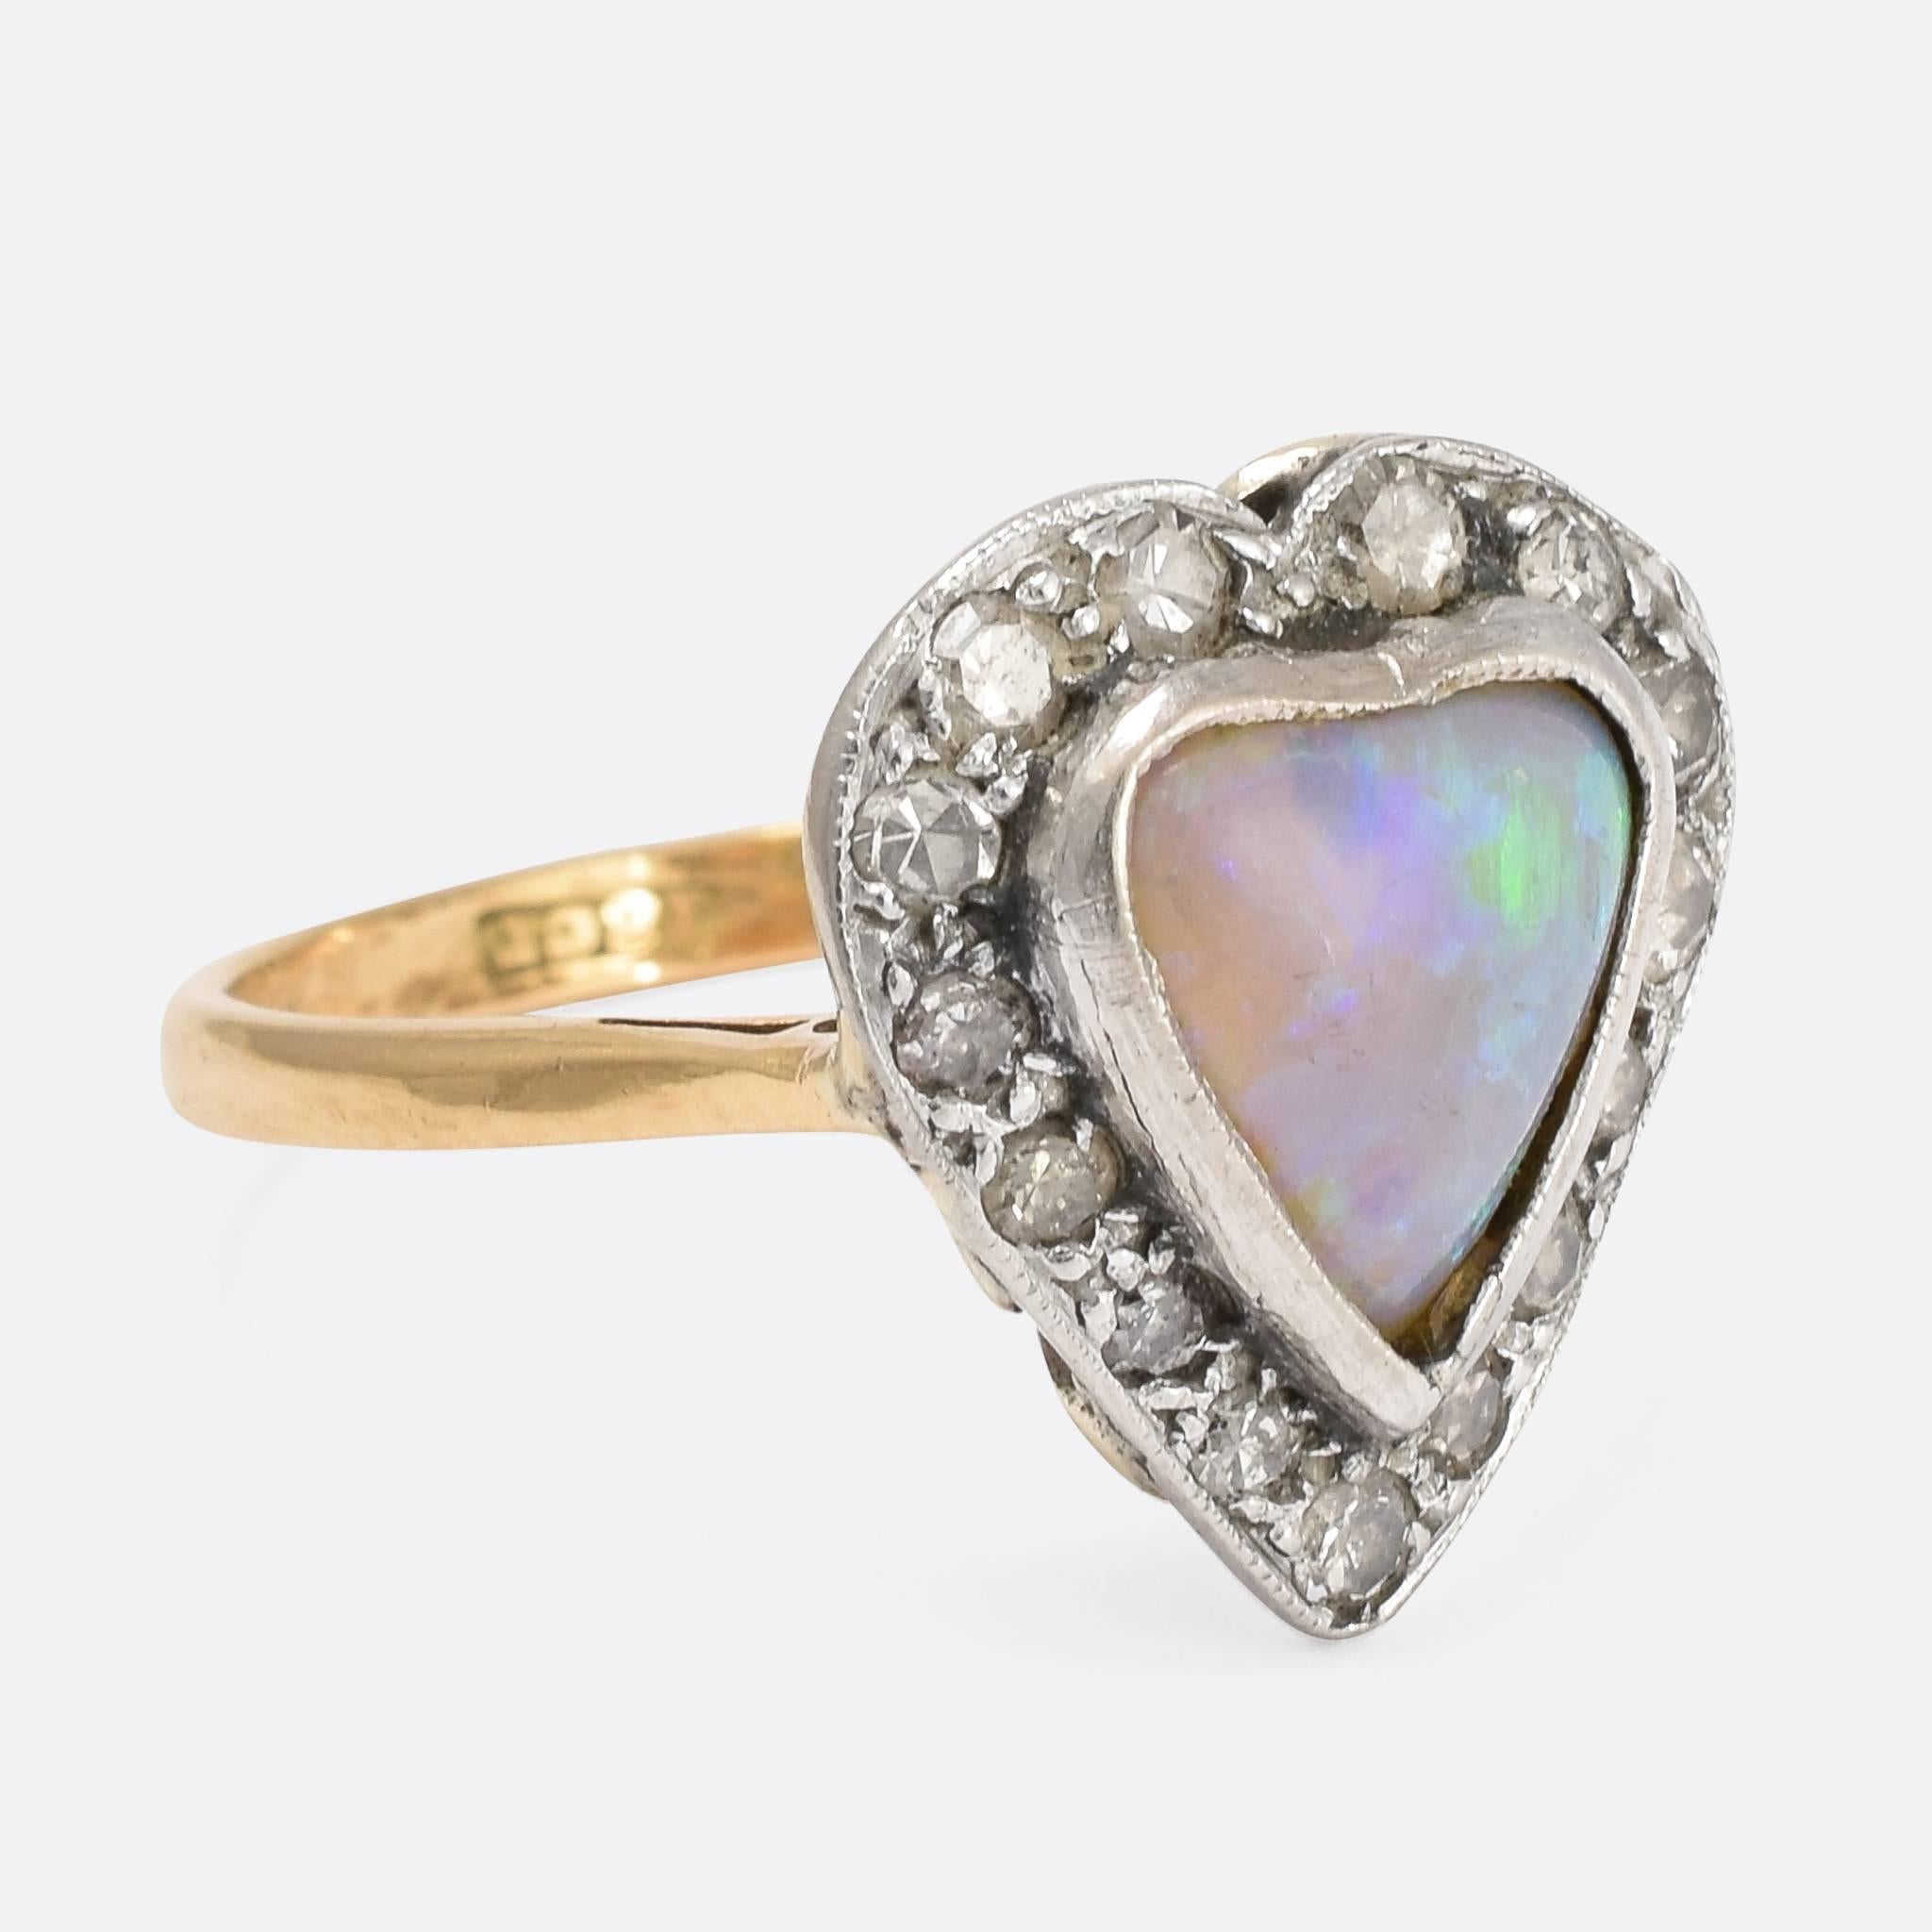 This beautiful antique ring is modelled with a heart-shaped head, set with diamonds and a heart-shaped opal. The simple band is crafted from 18ct yellow gold, with the stones set in silver. The back of the head is nicely galleried, allowing light in